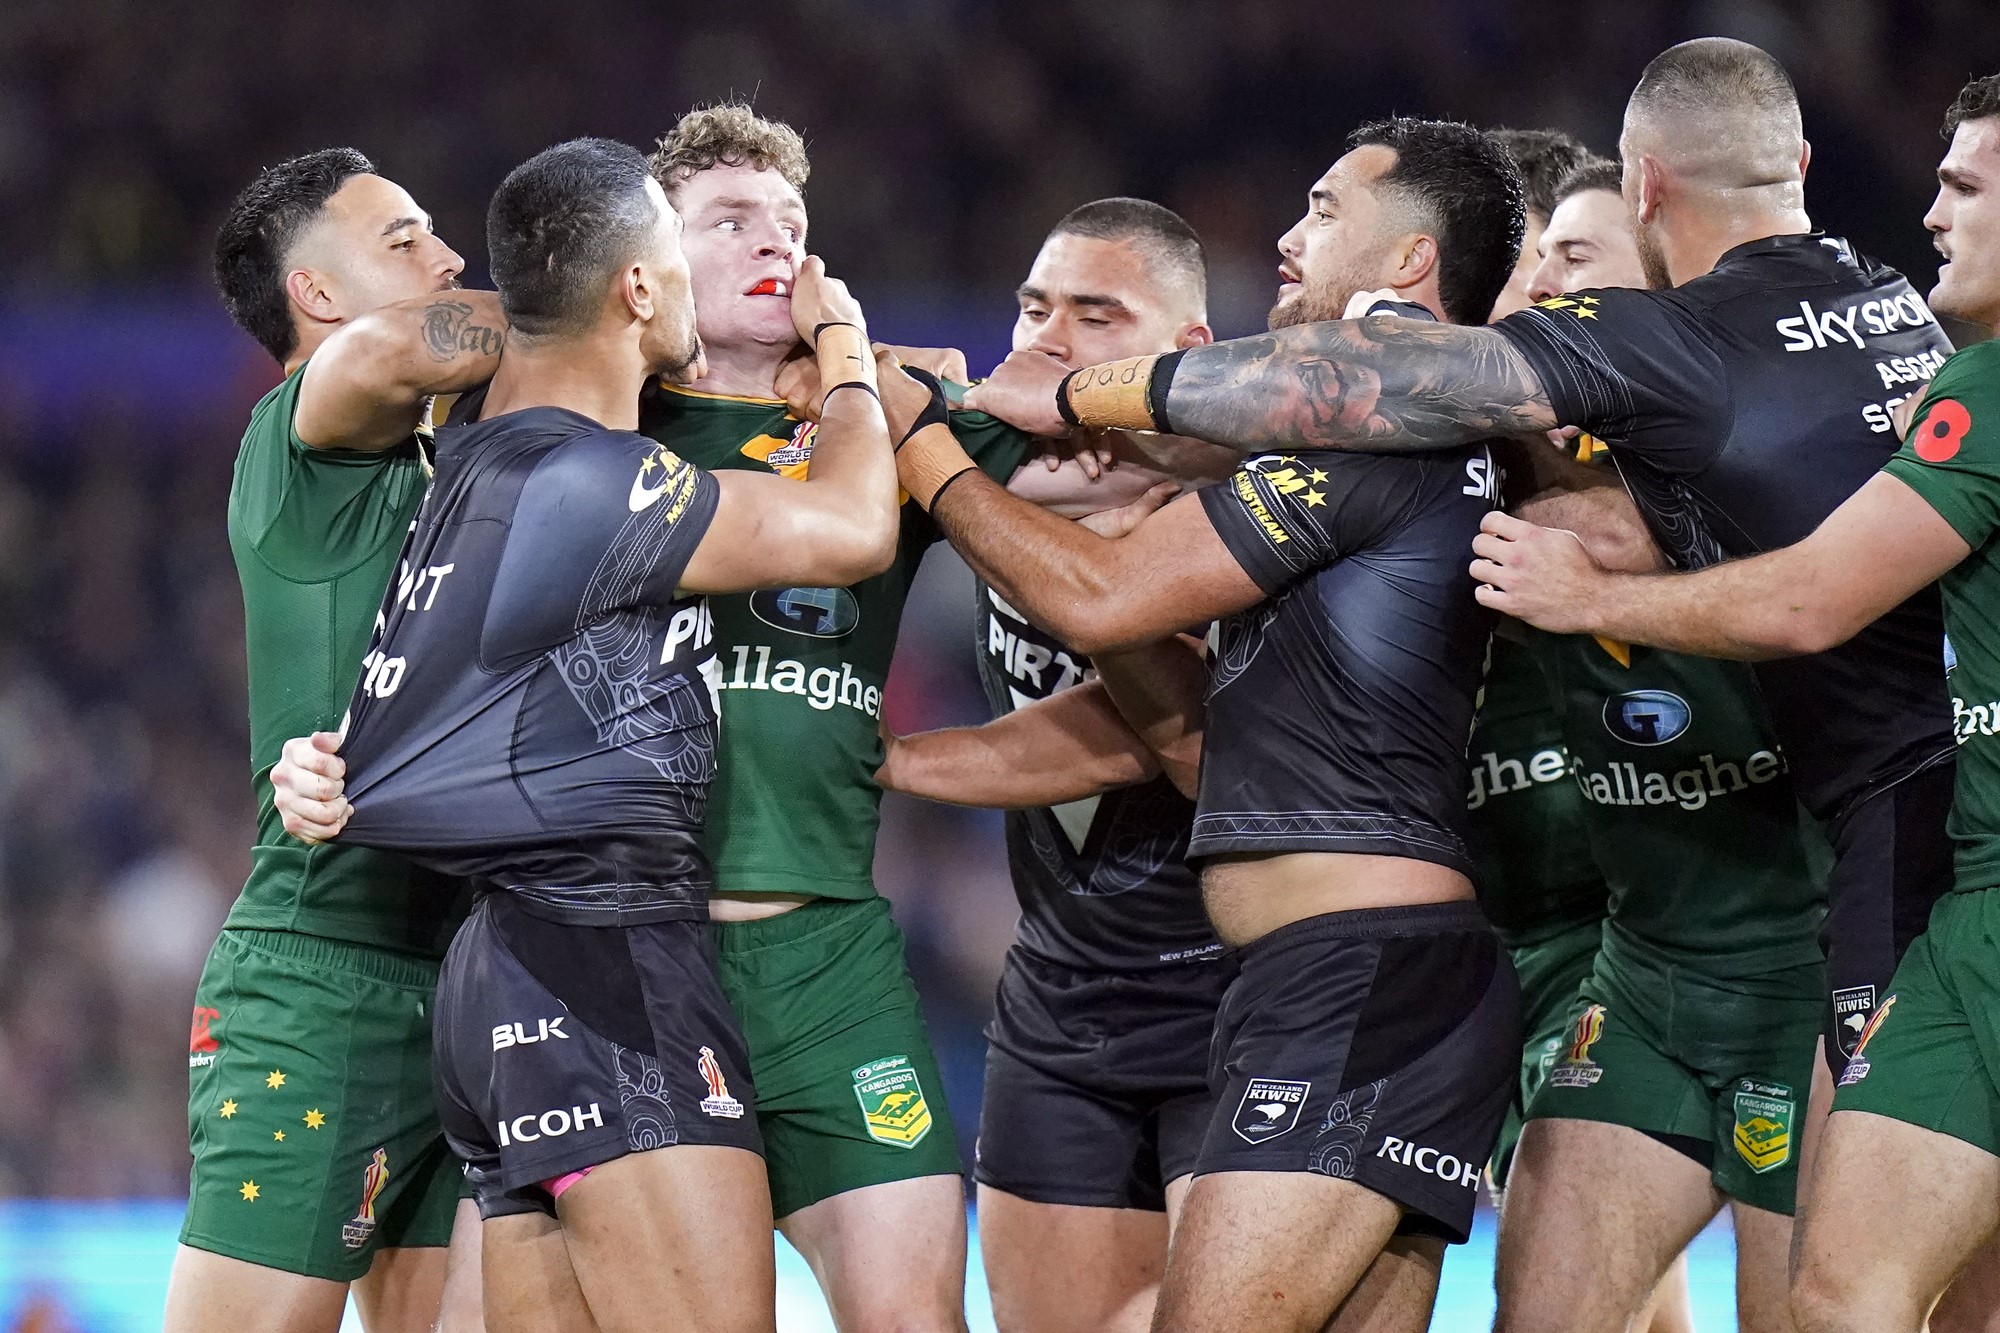 Kangaroos and Kiwis players fight during a Rugby League World Cup semifinal.